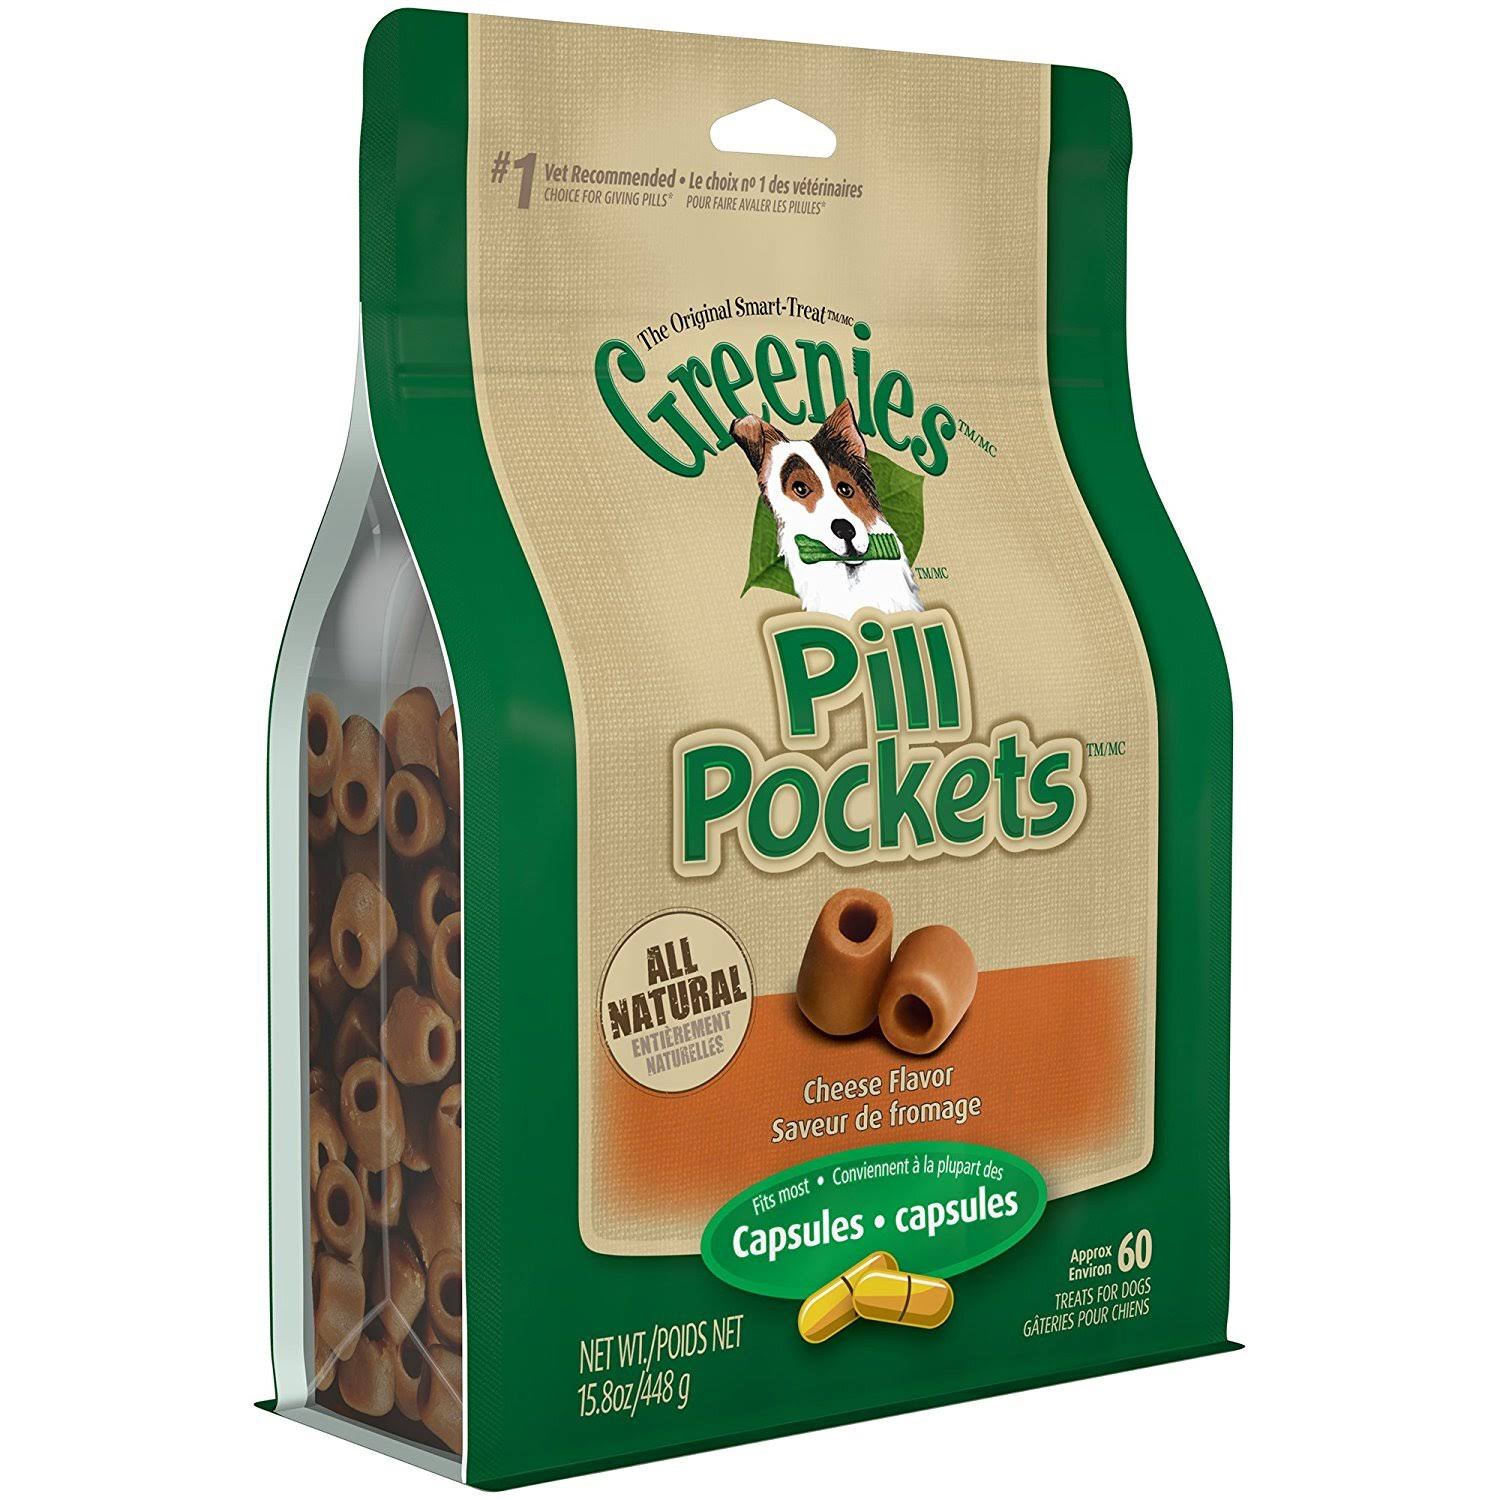 Greenies Pill Pockets Cheese Flavor for Dogs 15.8oz 60ct Capsules